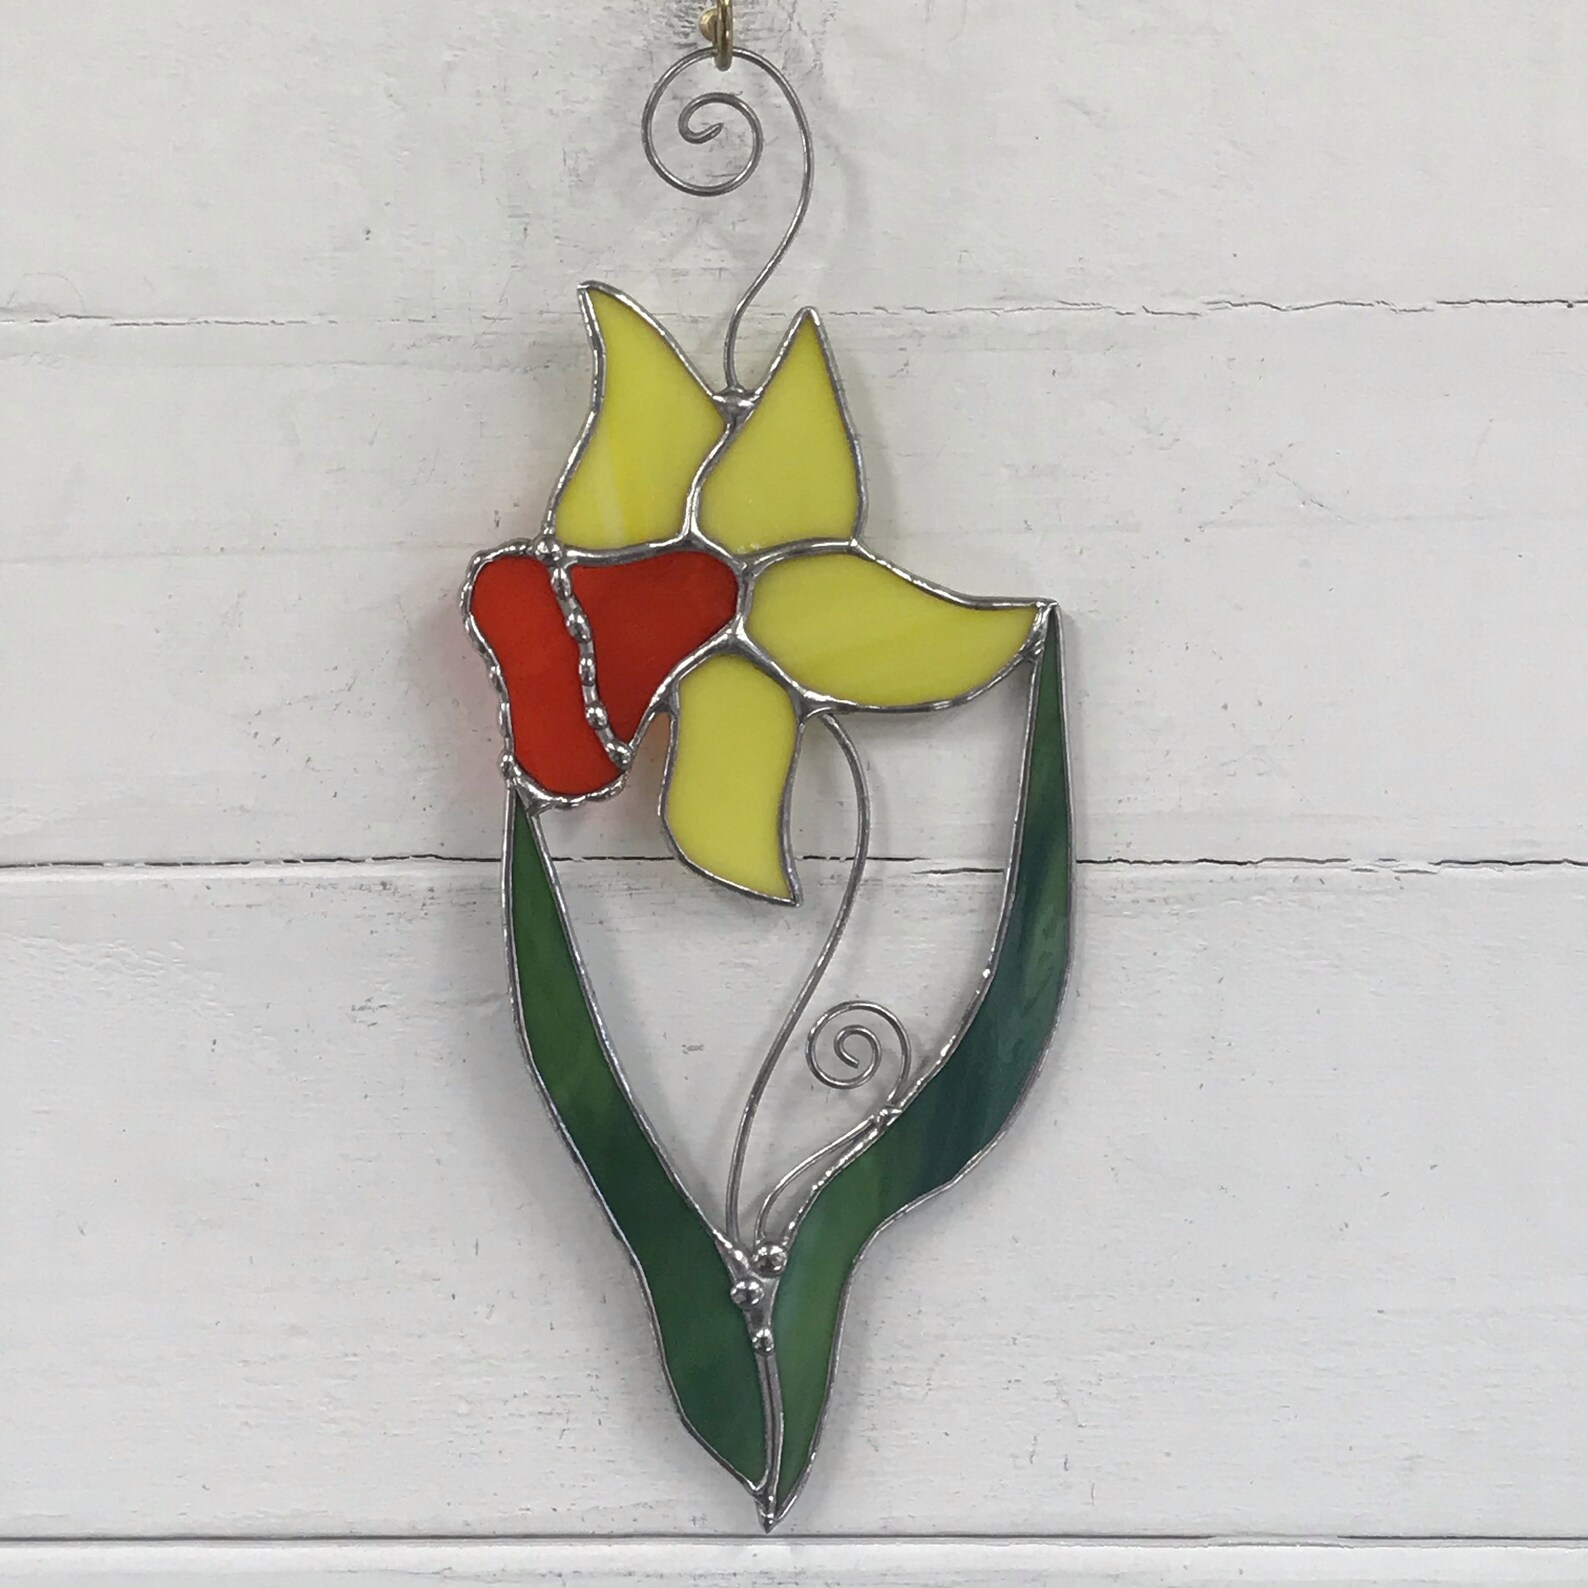 STAINED GLASS DAFFODIL glass art stained glass window | Etsy